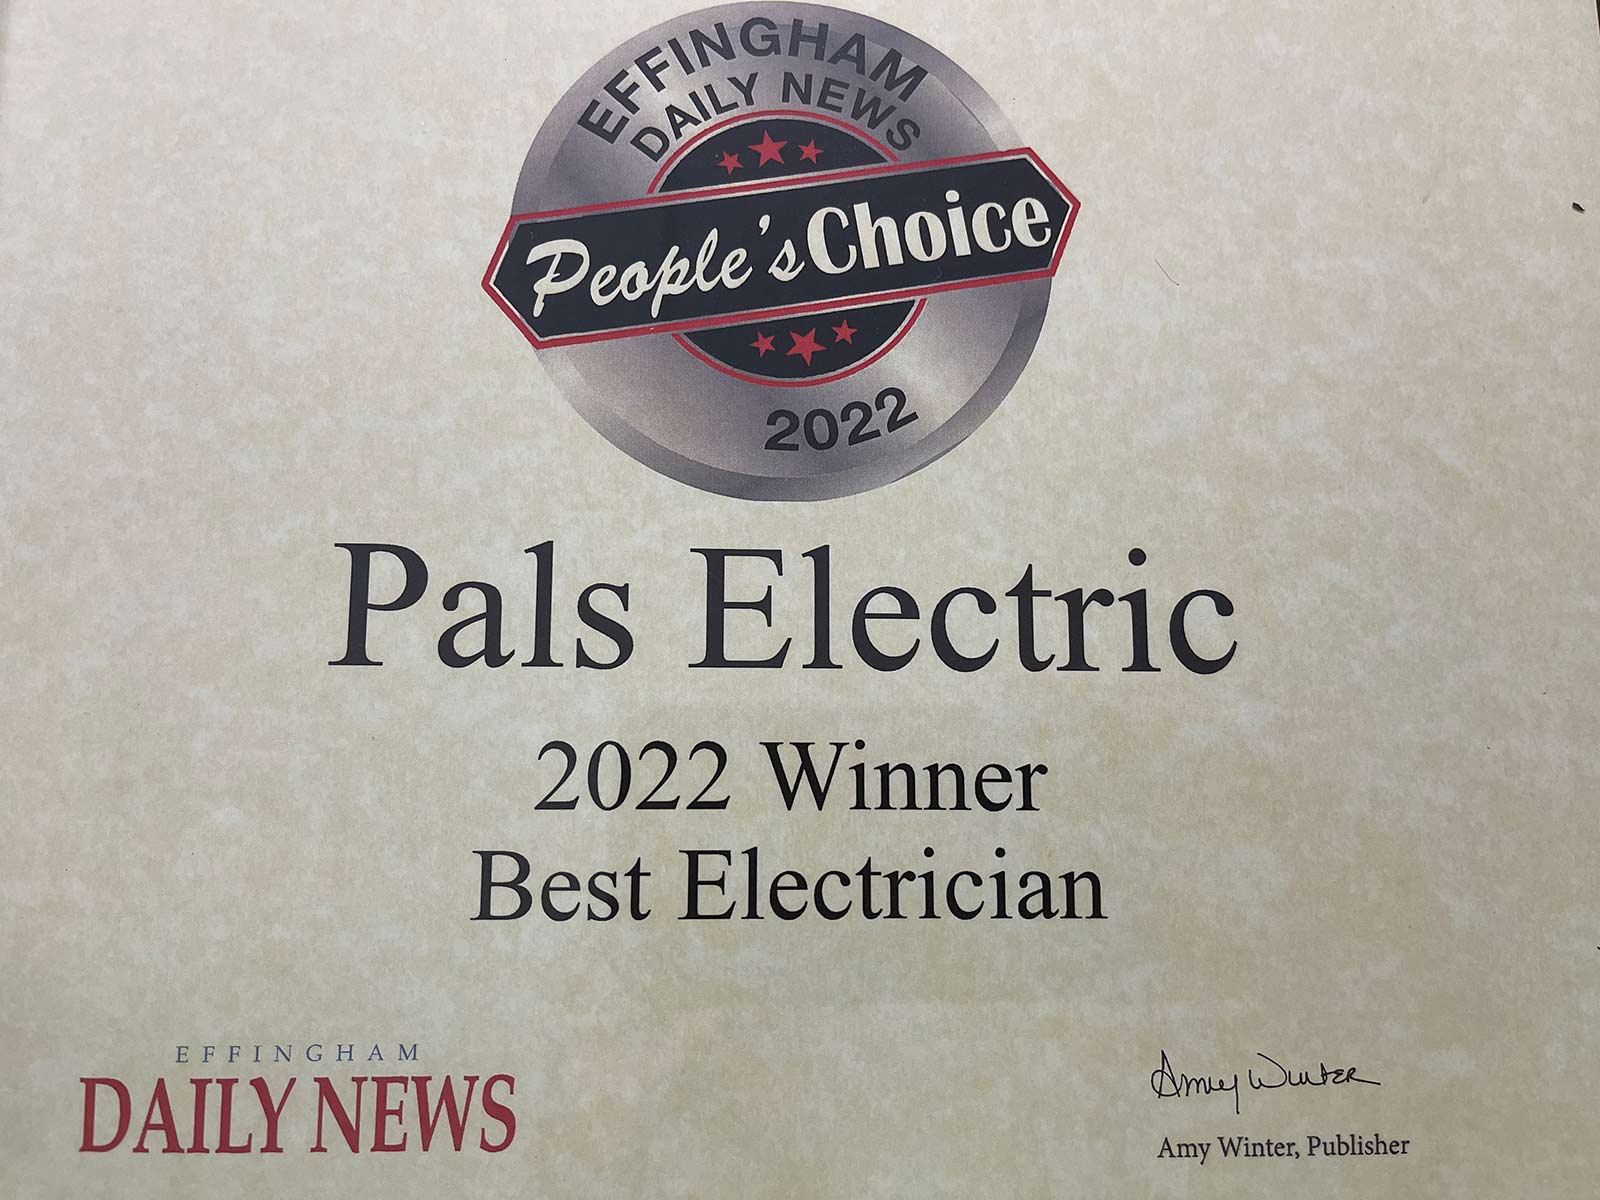 Effingham Daily News People's Choice 2022: Pals Electric for Best Electrician